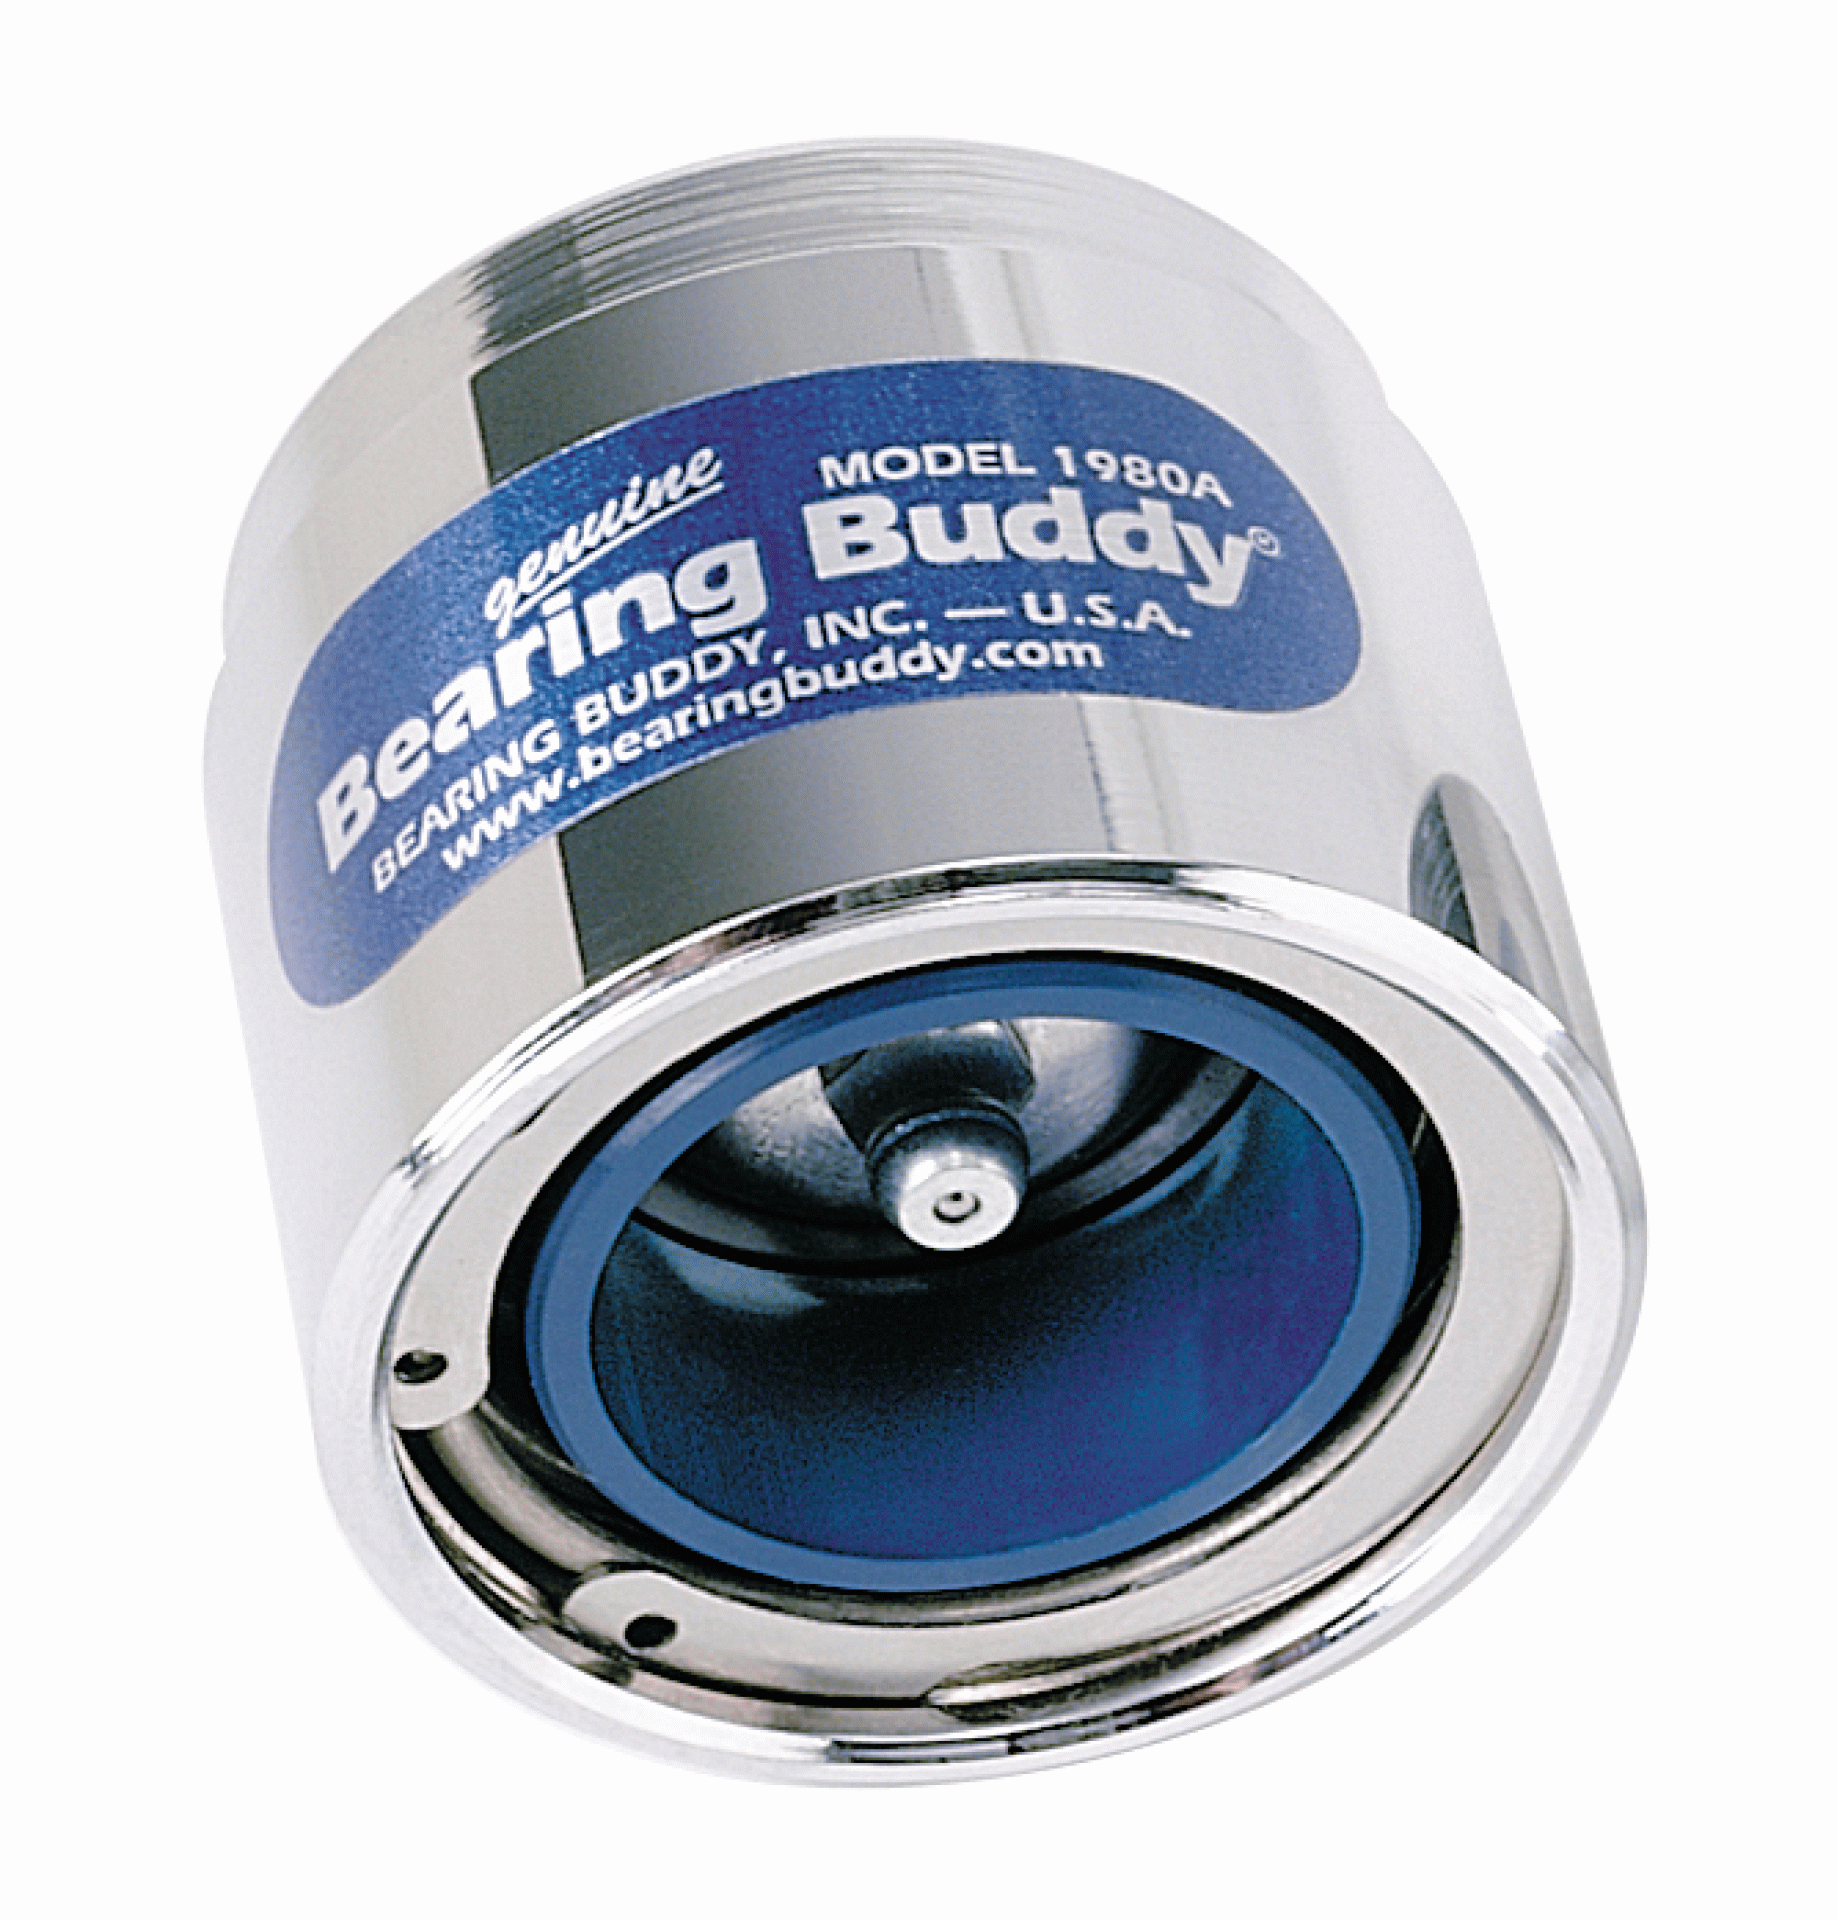 BEARING BUDDY #1980ASS - STAINLESS STEEL WITH BLUE AUTO CHECK INDICATOR